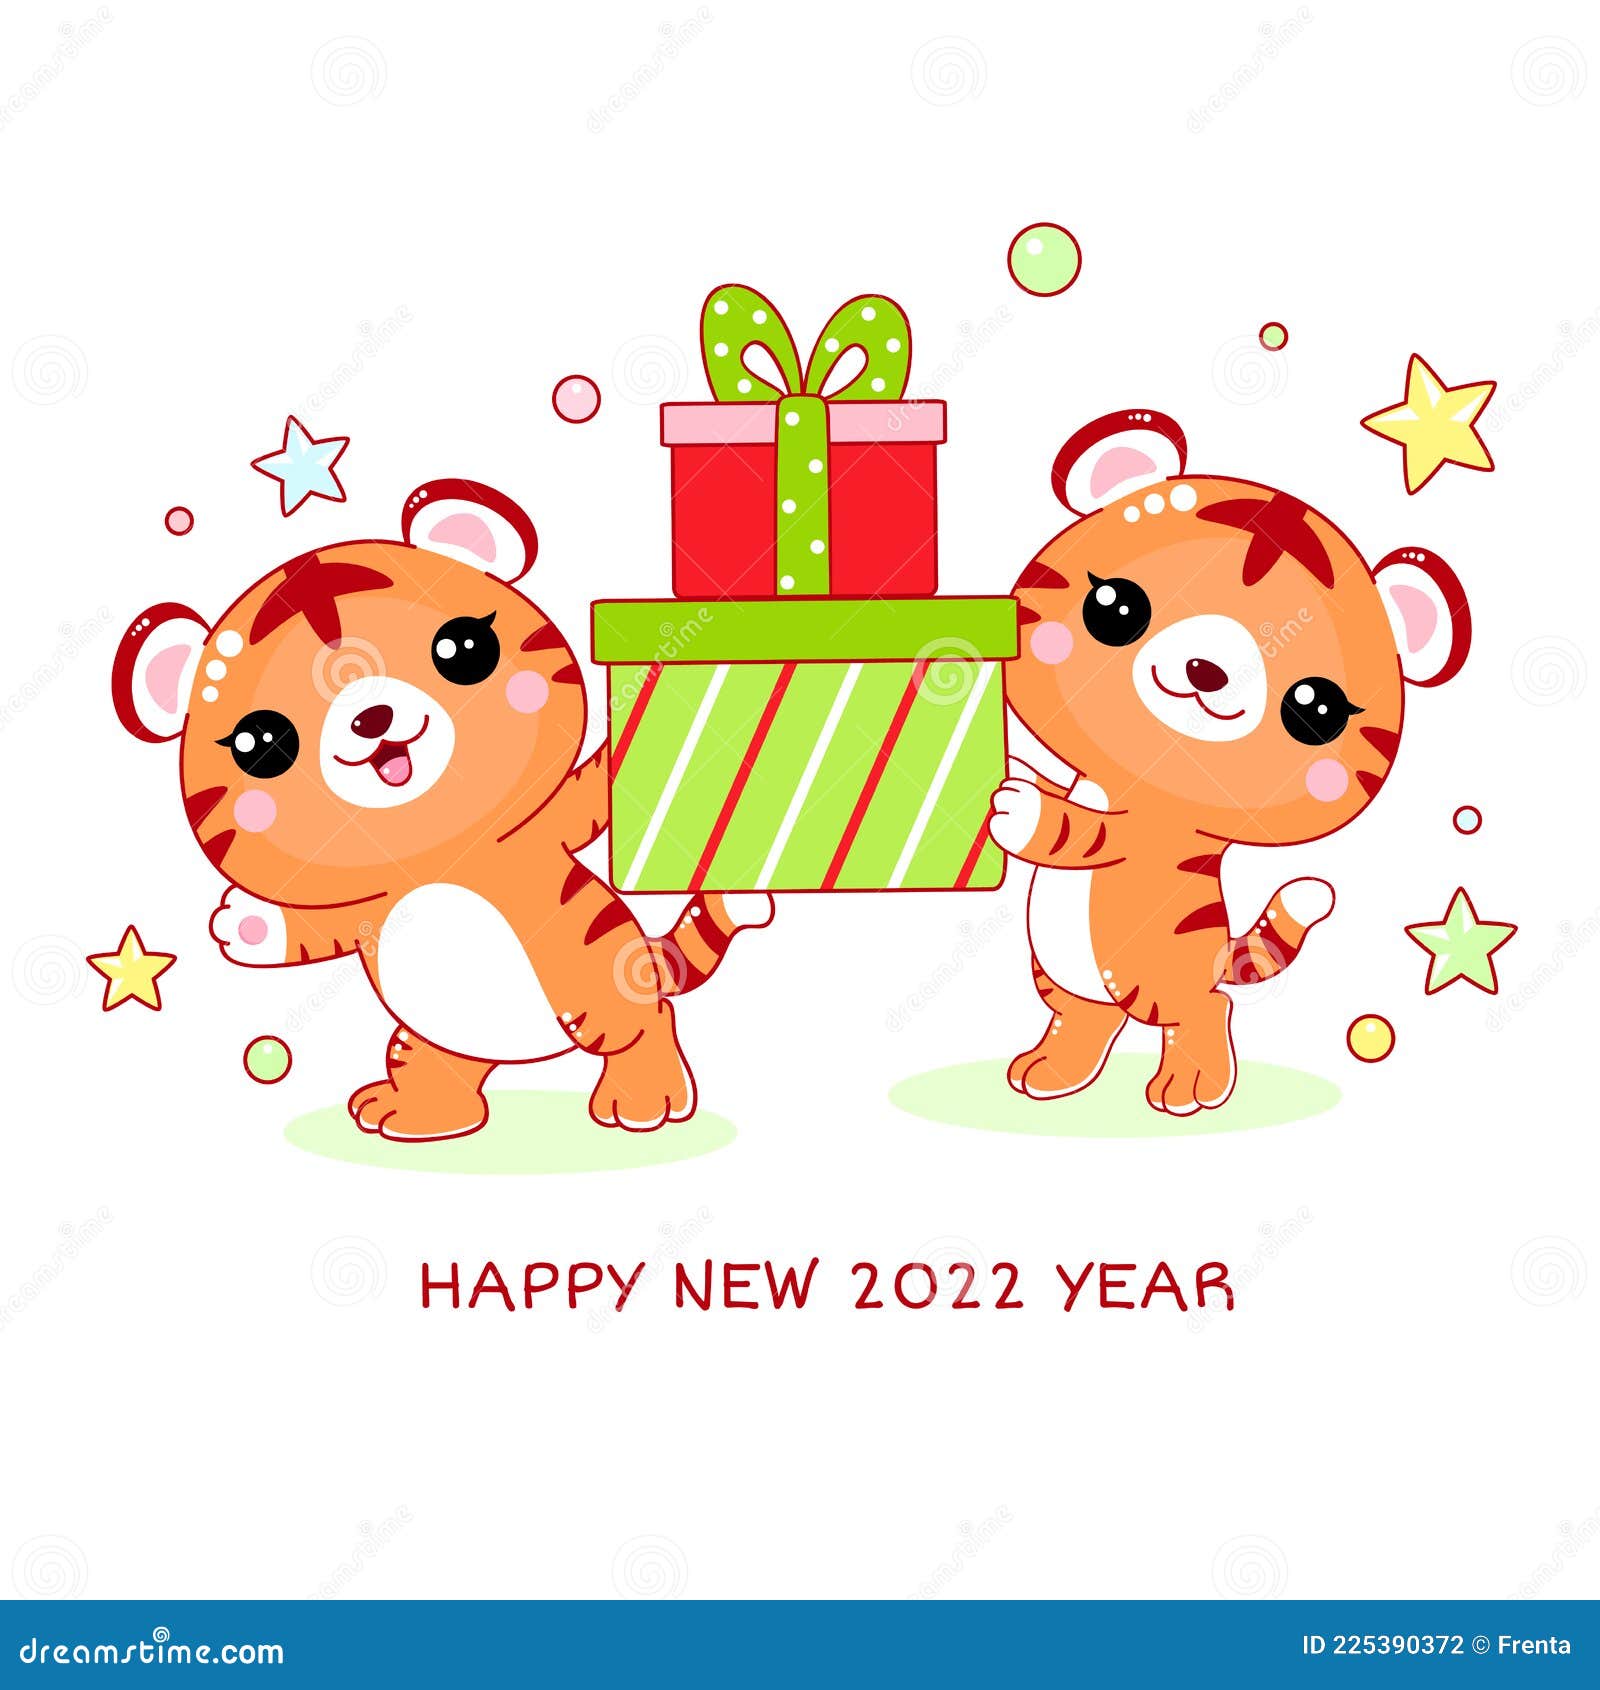 greeting card 2022 images clipart